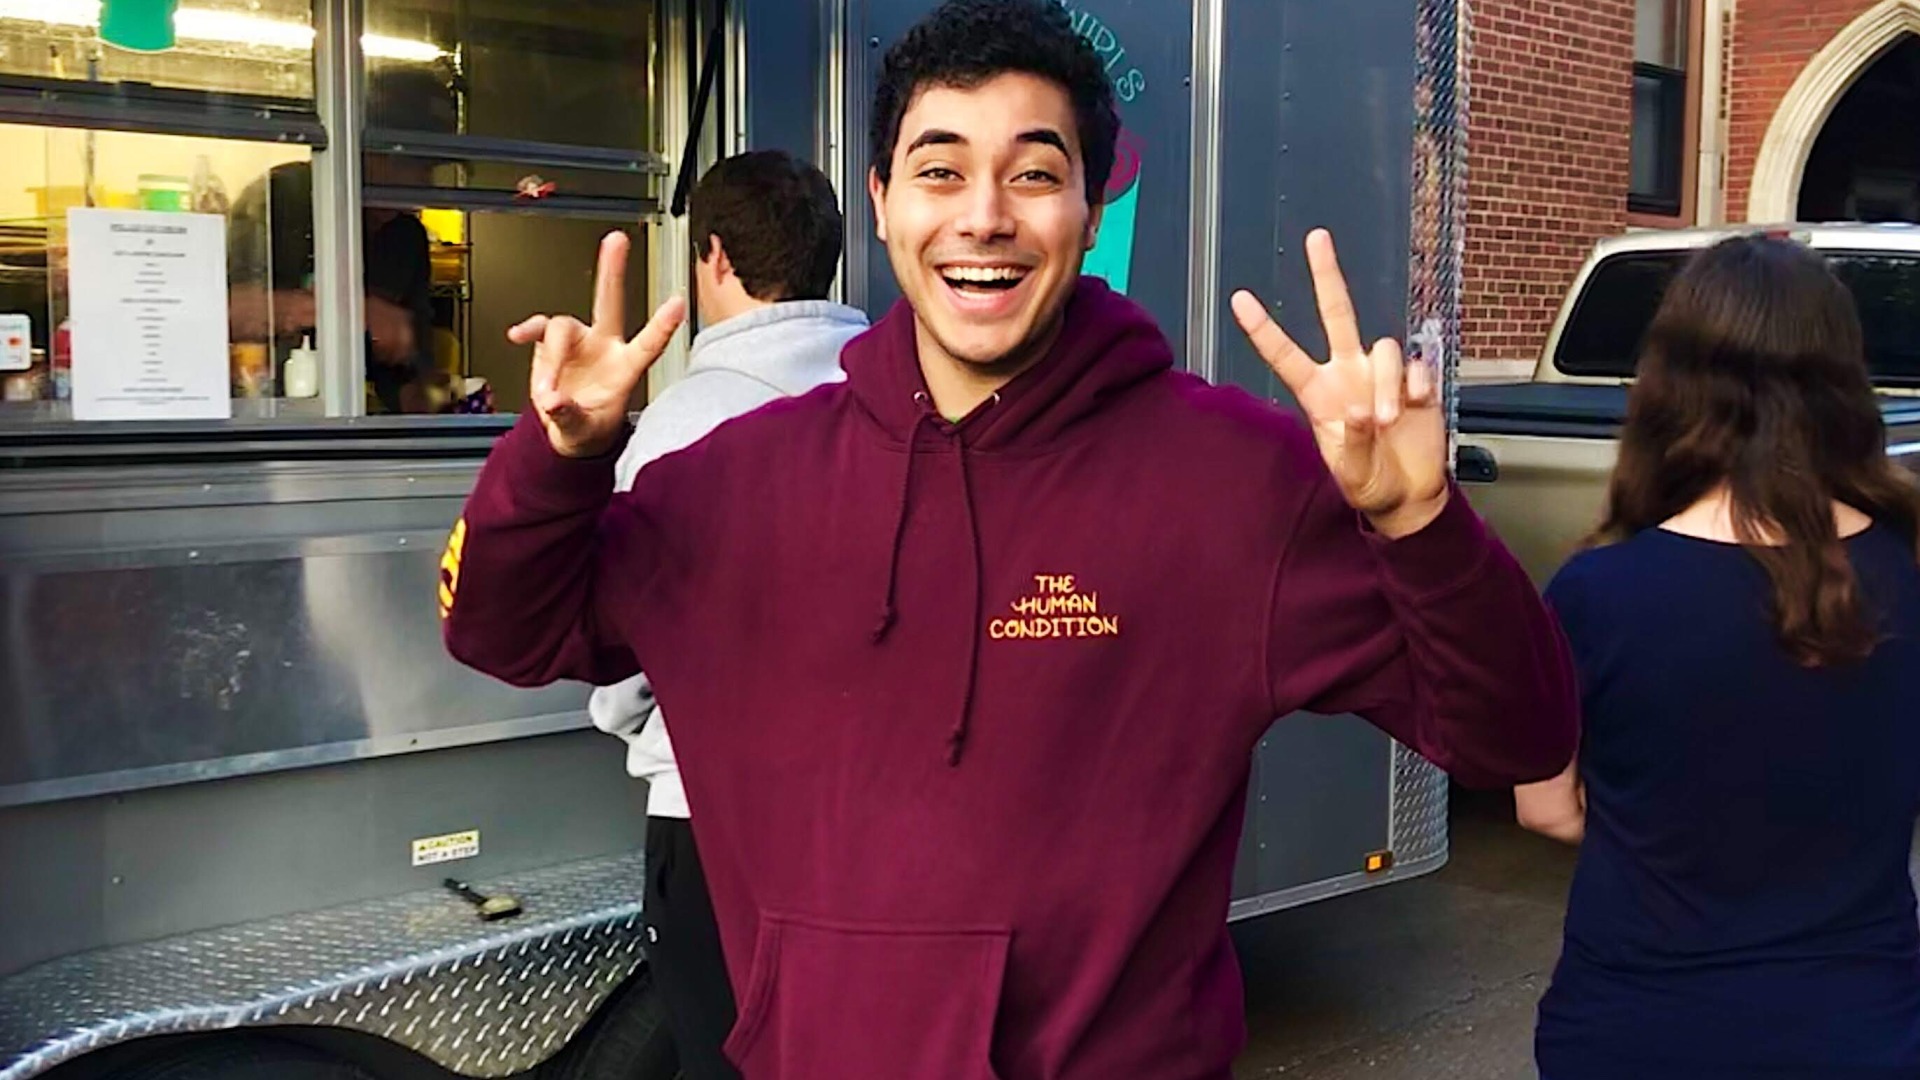 Guy with two peace signs in front of food truck